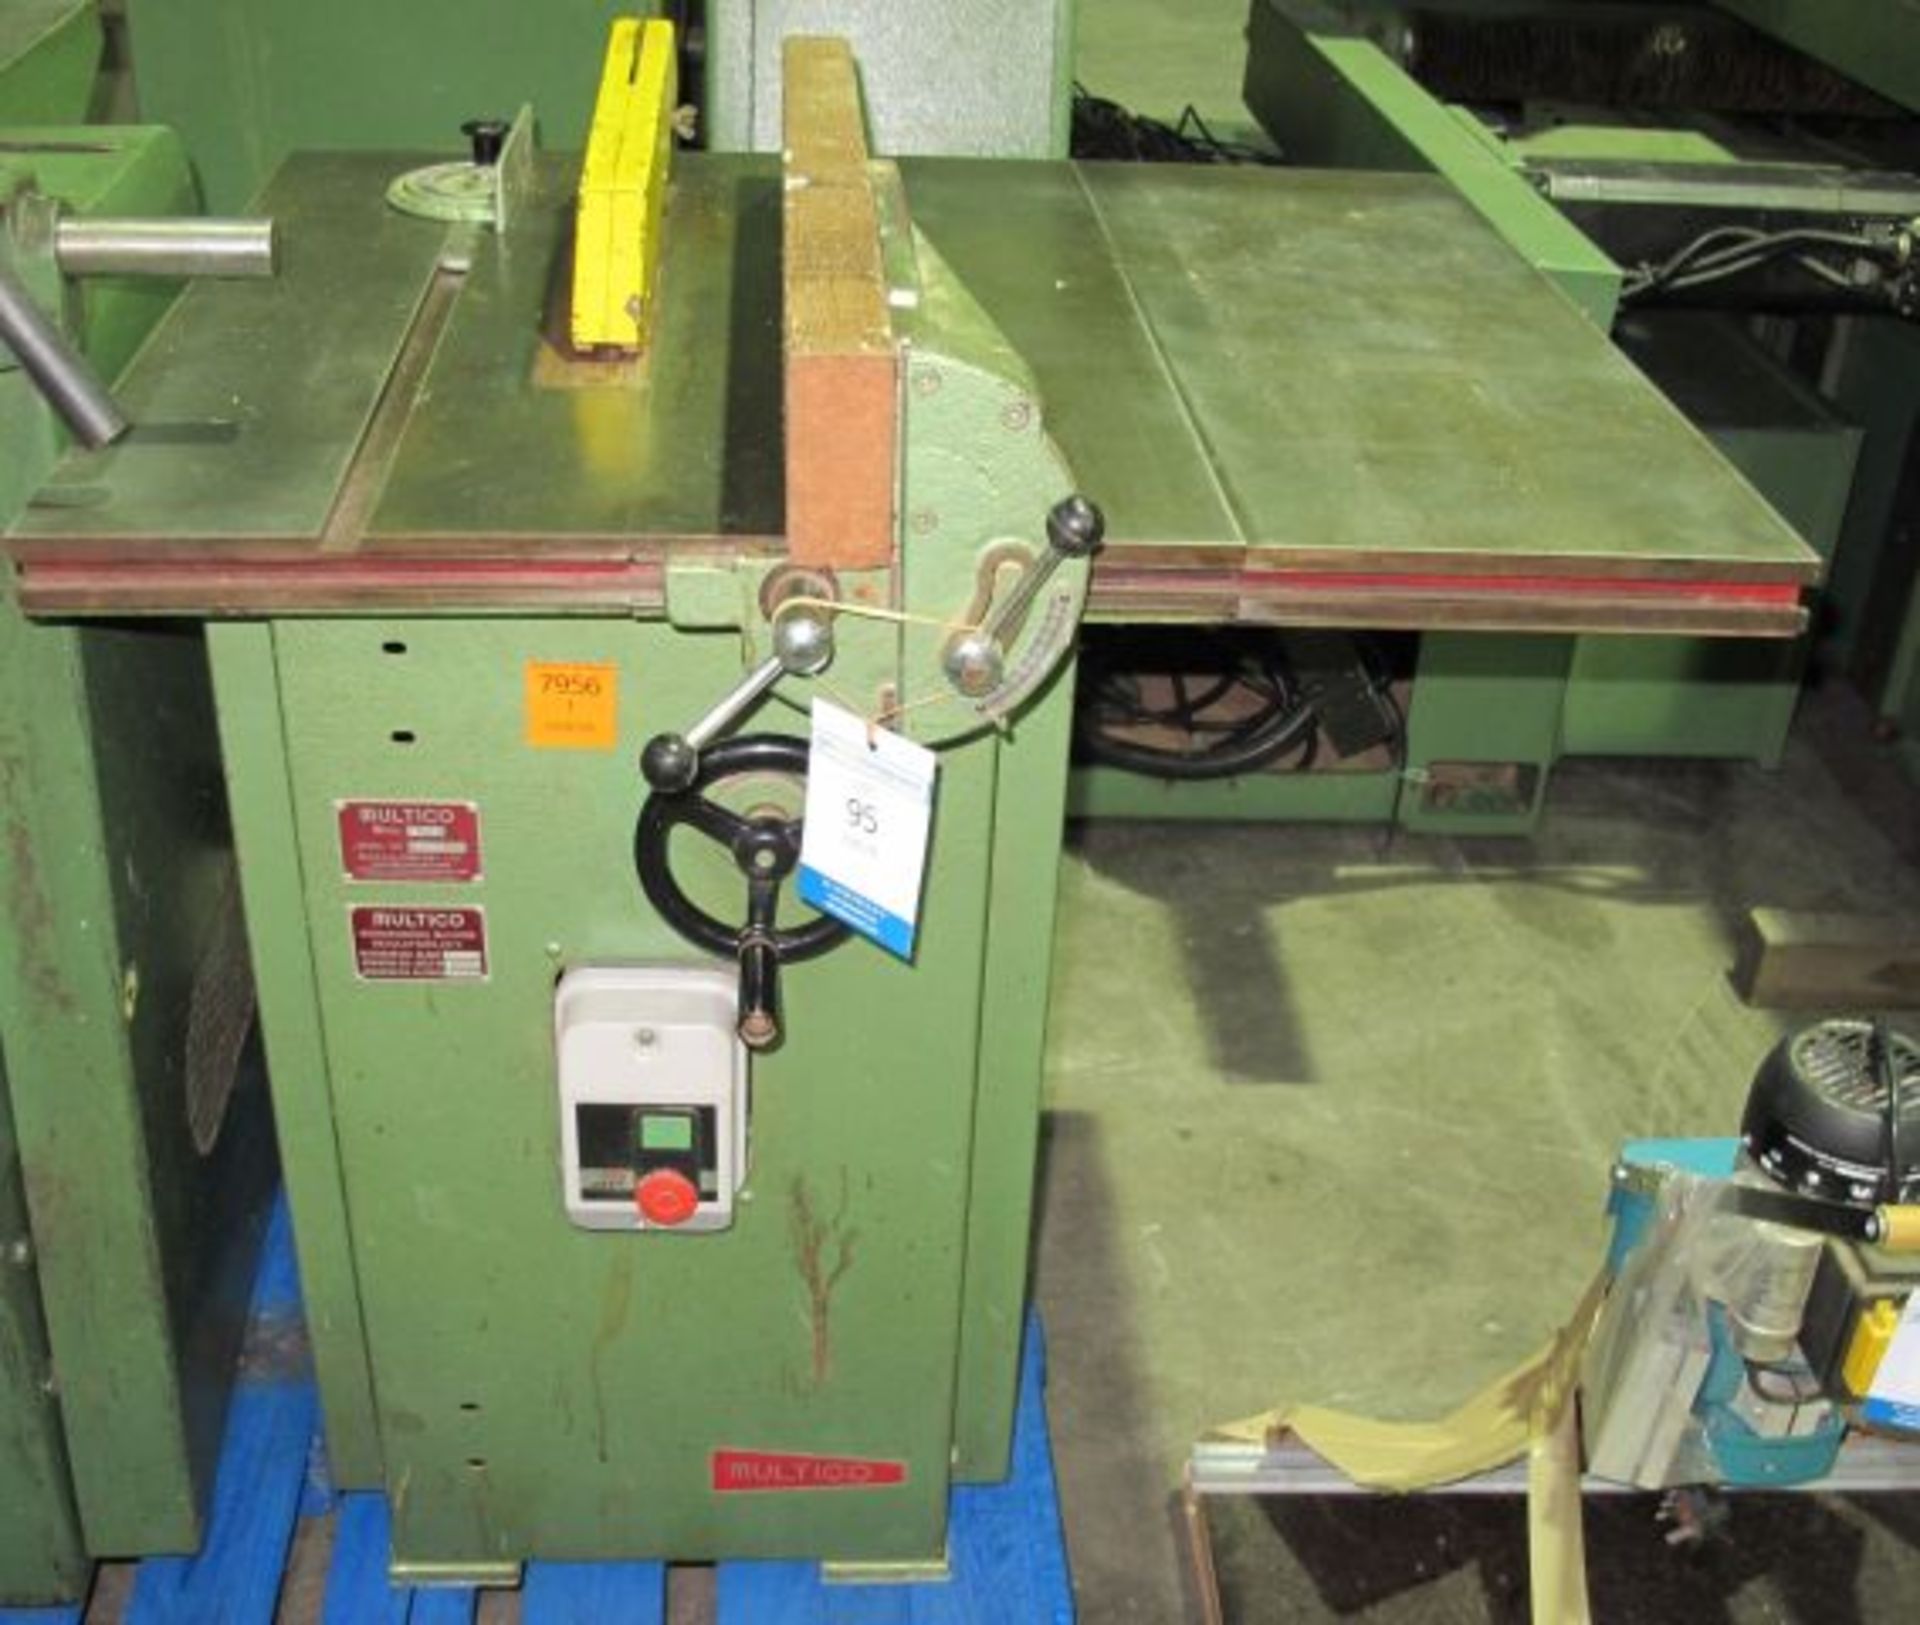 * Multico Model A/3 Circular Saw Bench; max blade diameter 300mm; serial number 7185; 3 phase -